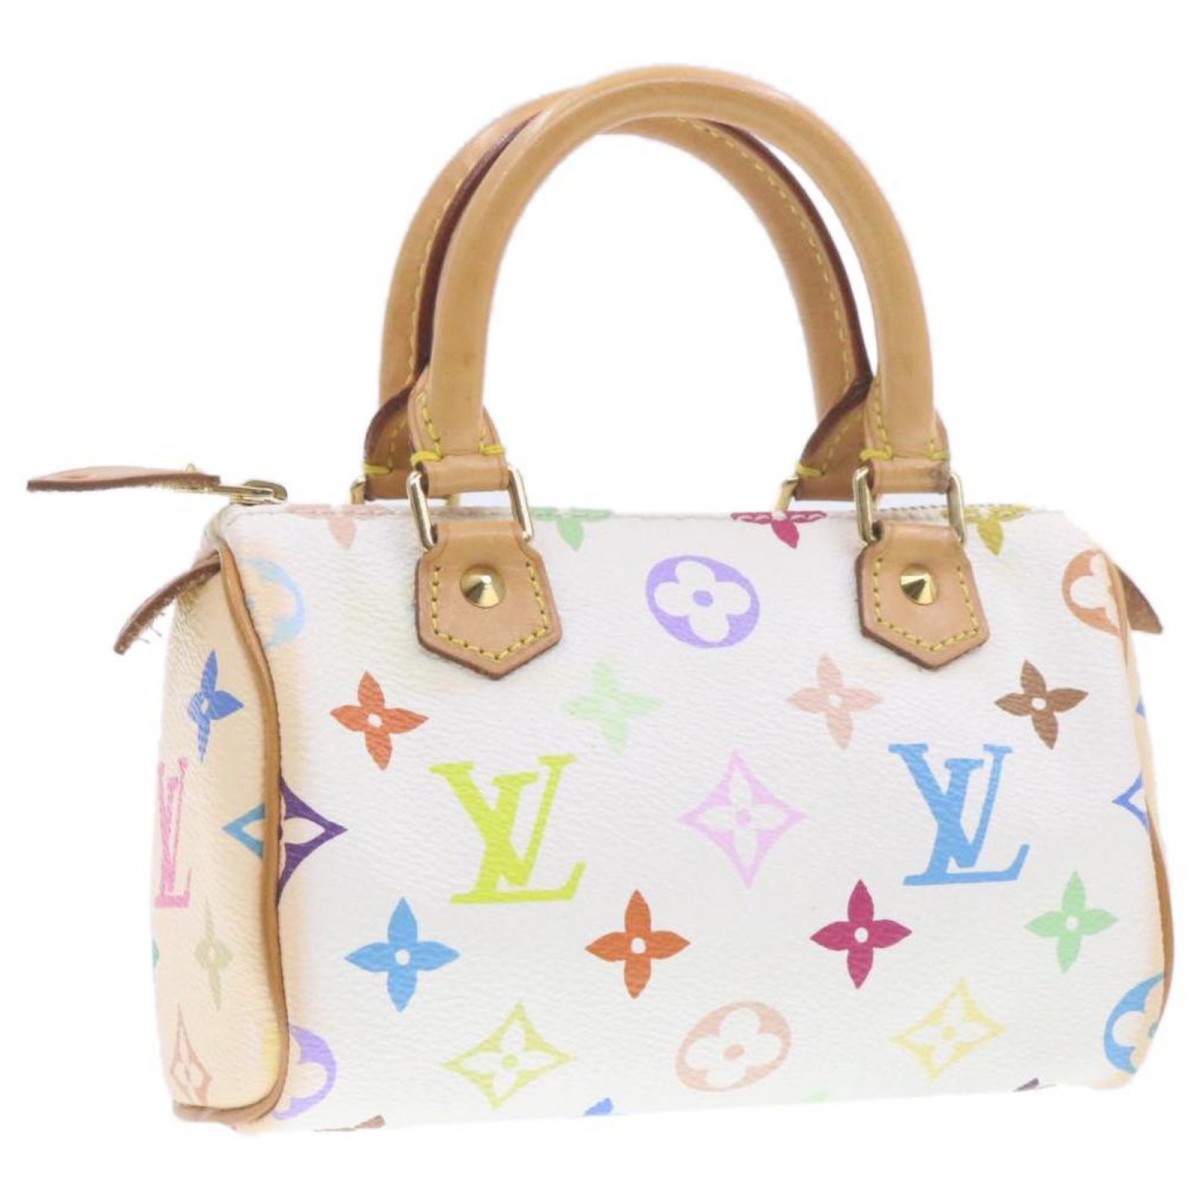 How can I buy a Louis Vuitton bag multicolor replica from China?(2022)-Best Quality Fake Louis Vuitton Bag Online Store, Replica designer bag ru